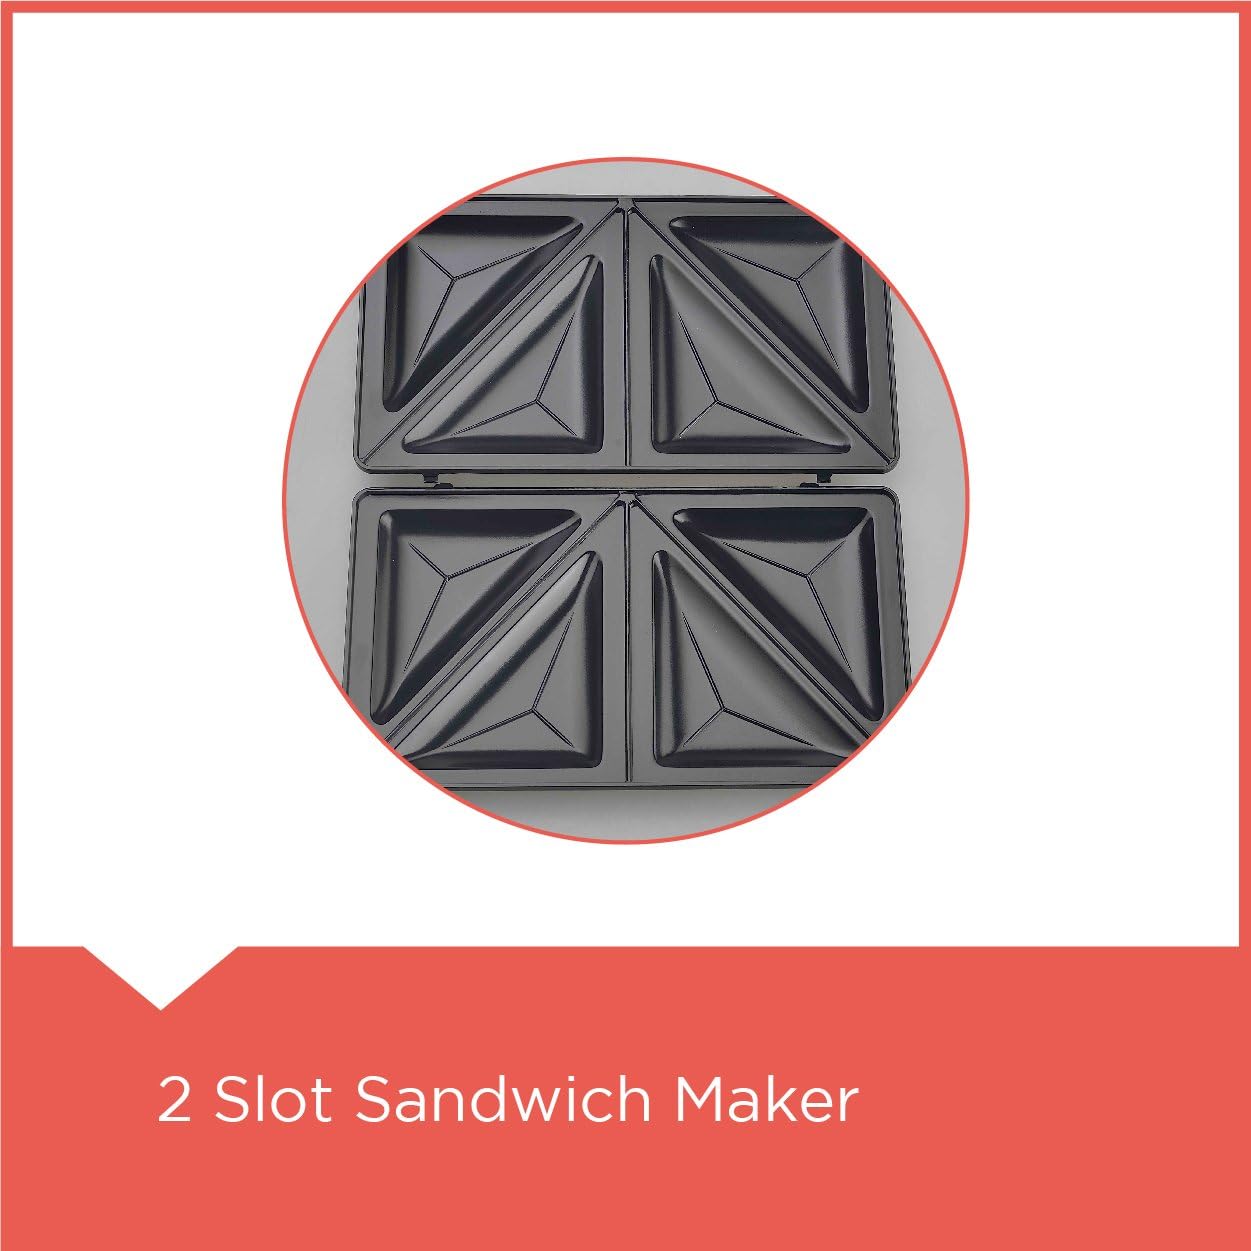 Brown Box Sandwich Maker with Removable Grill Plate 2 Slot 750 W